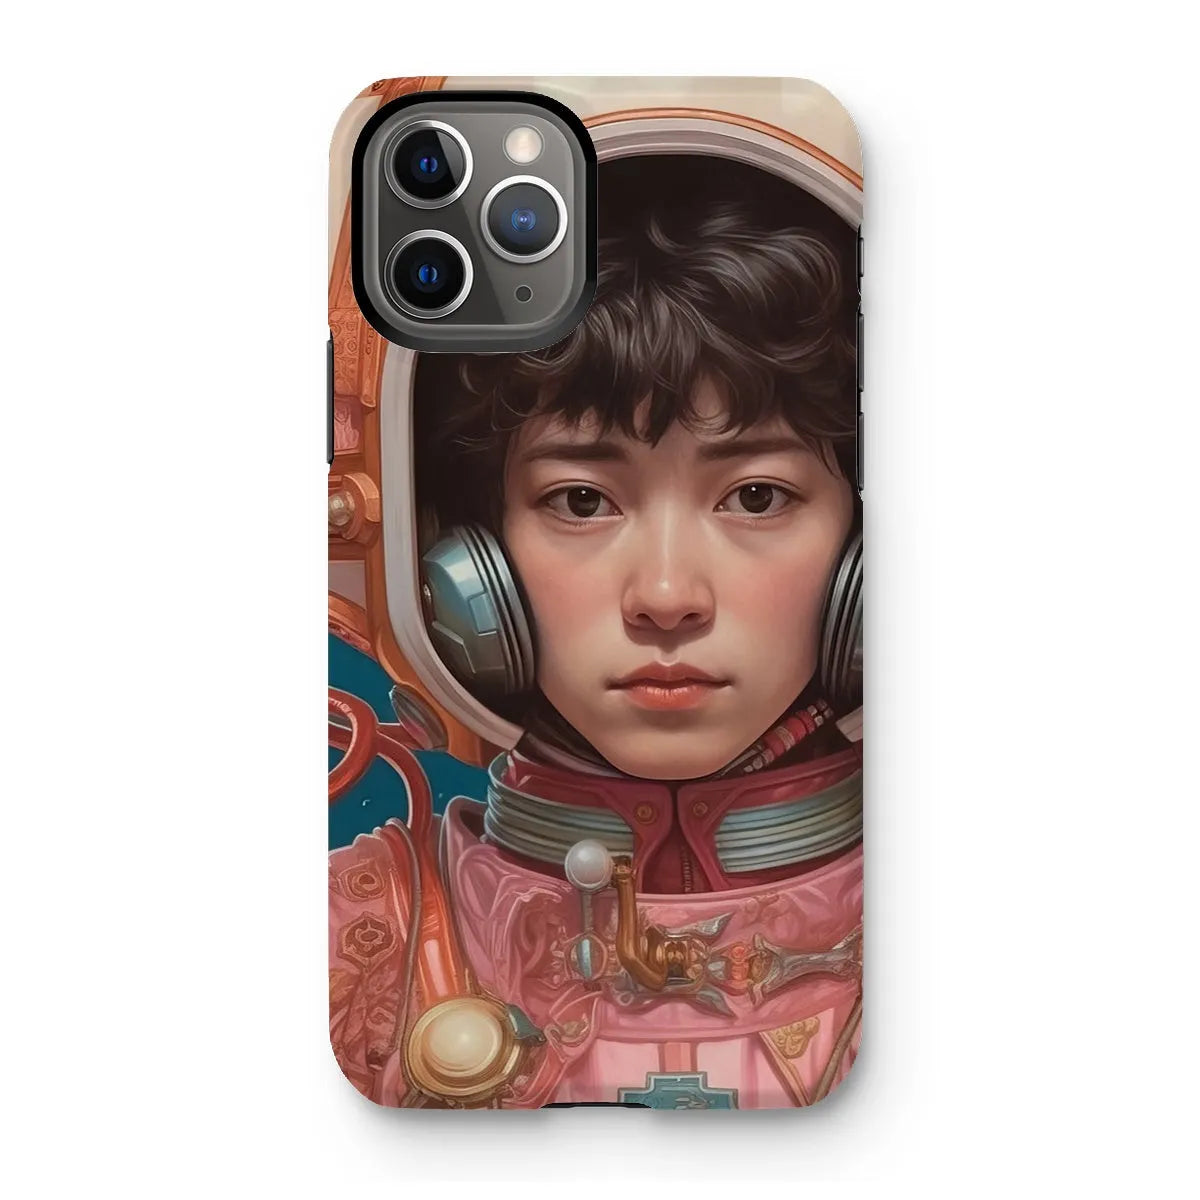 Kaito The Gay Astronaut - Lgbtq Art Phone Case - Iphone 11 Pro / Matte - Mobile Phone Cases - Aesthetic Art